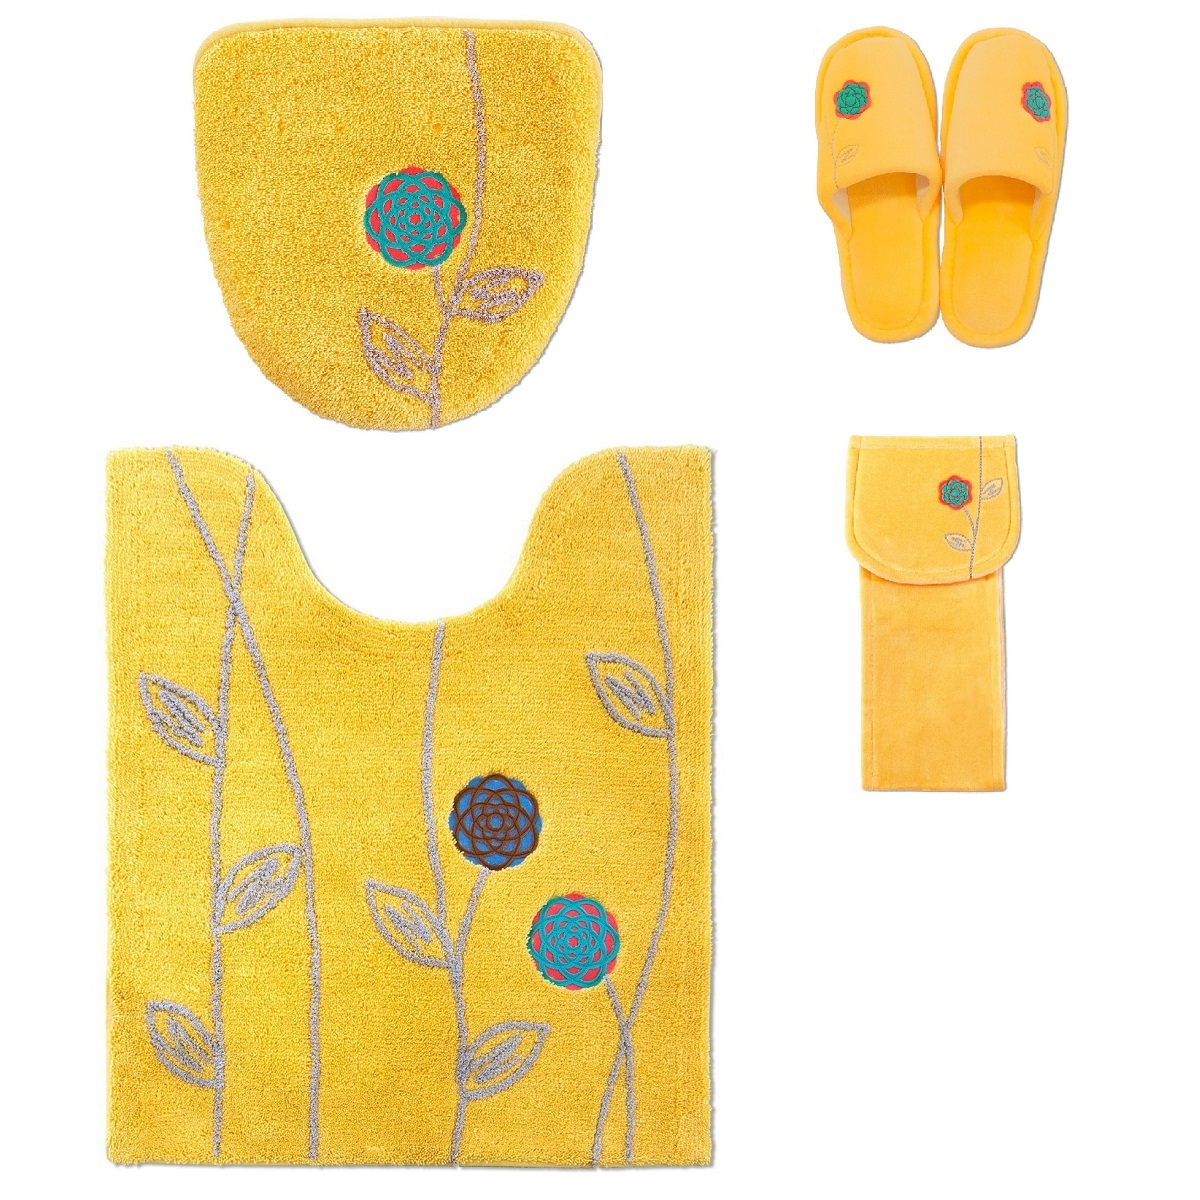  toilet mat set 4 point long toilet mat (65×75cm) set 4 point set feng shui ear length luck with money yellow color yellow Northern Europe washing heating type okaetofto.wa navy 